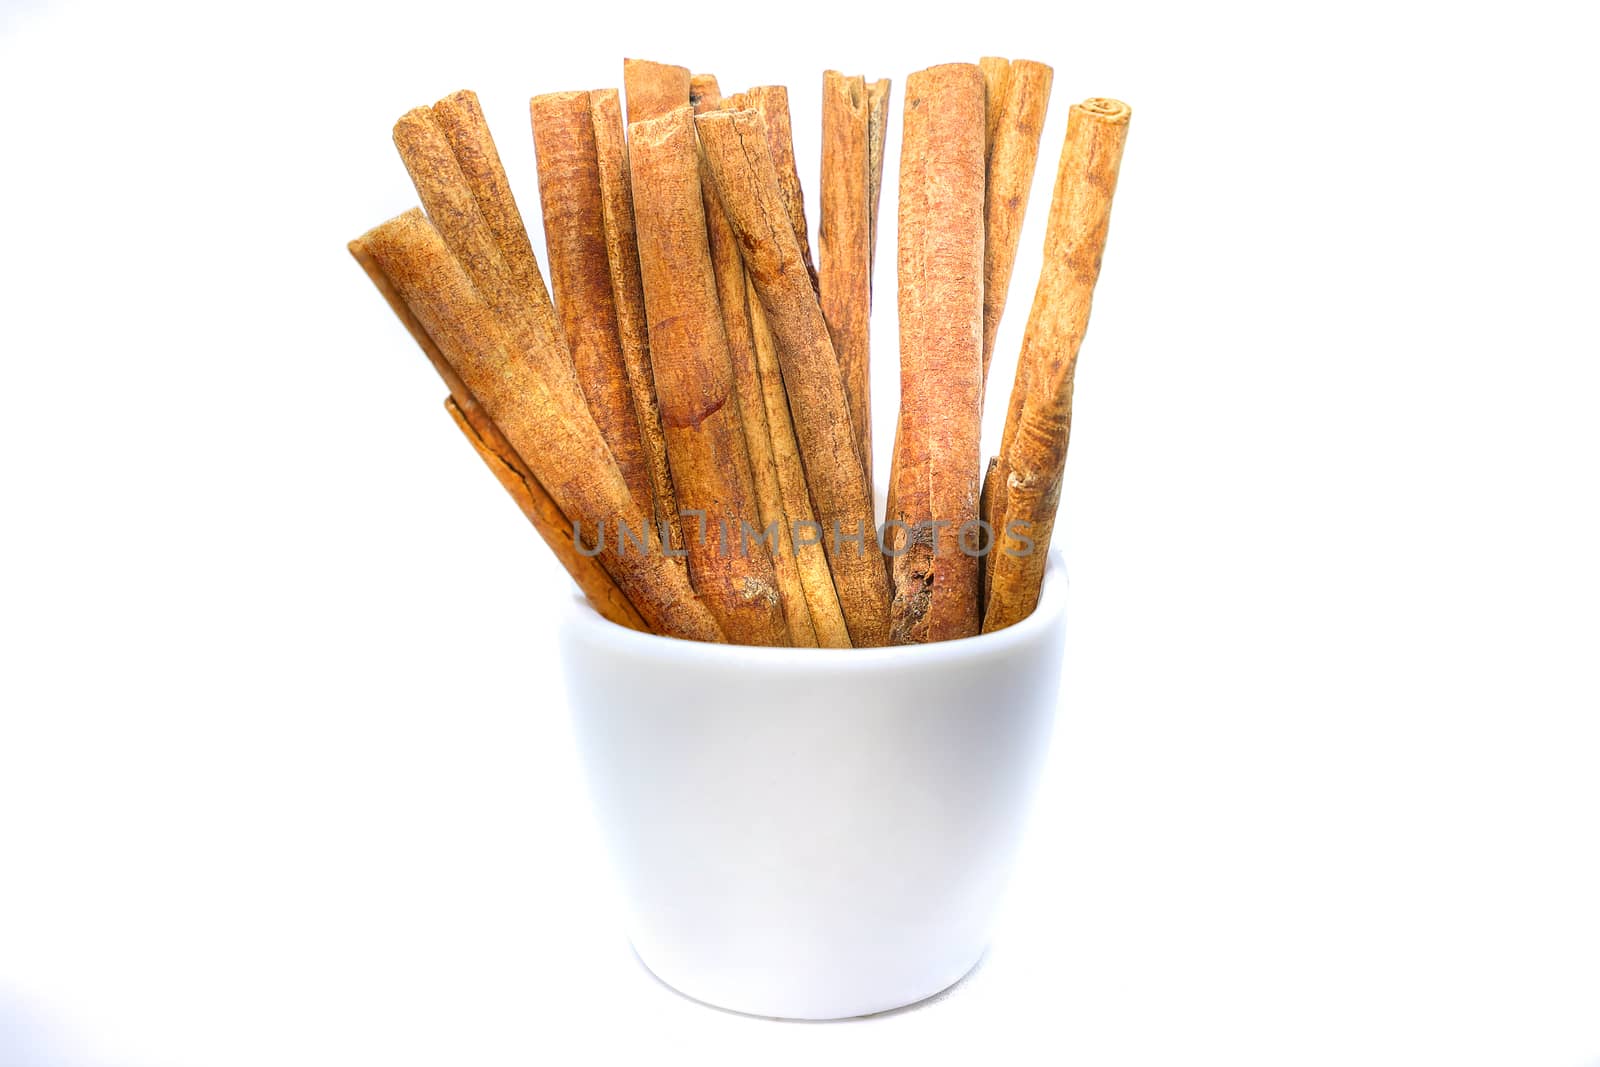 Brown cinnamon sticks in a white ceramic cup, front view, isolated on white background